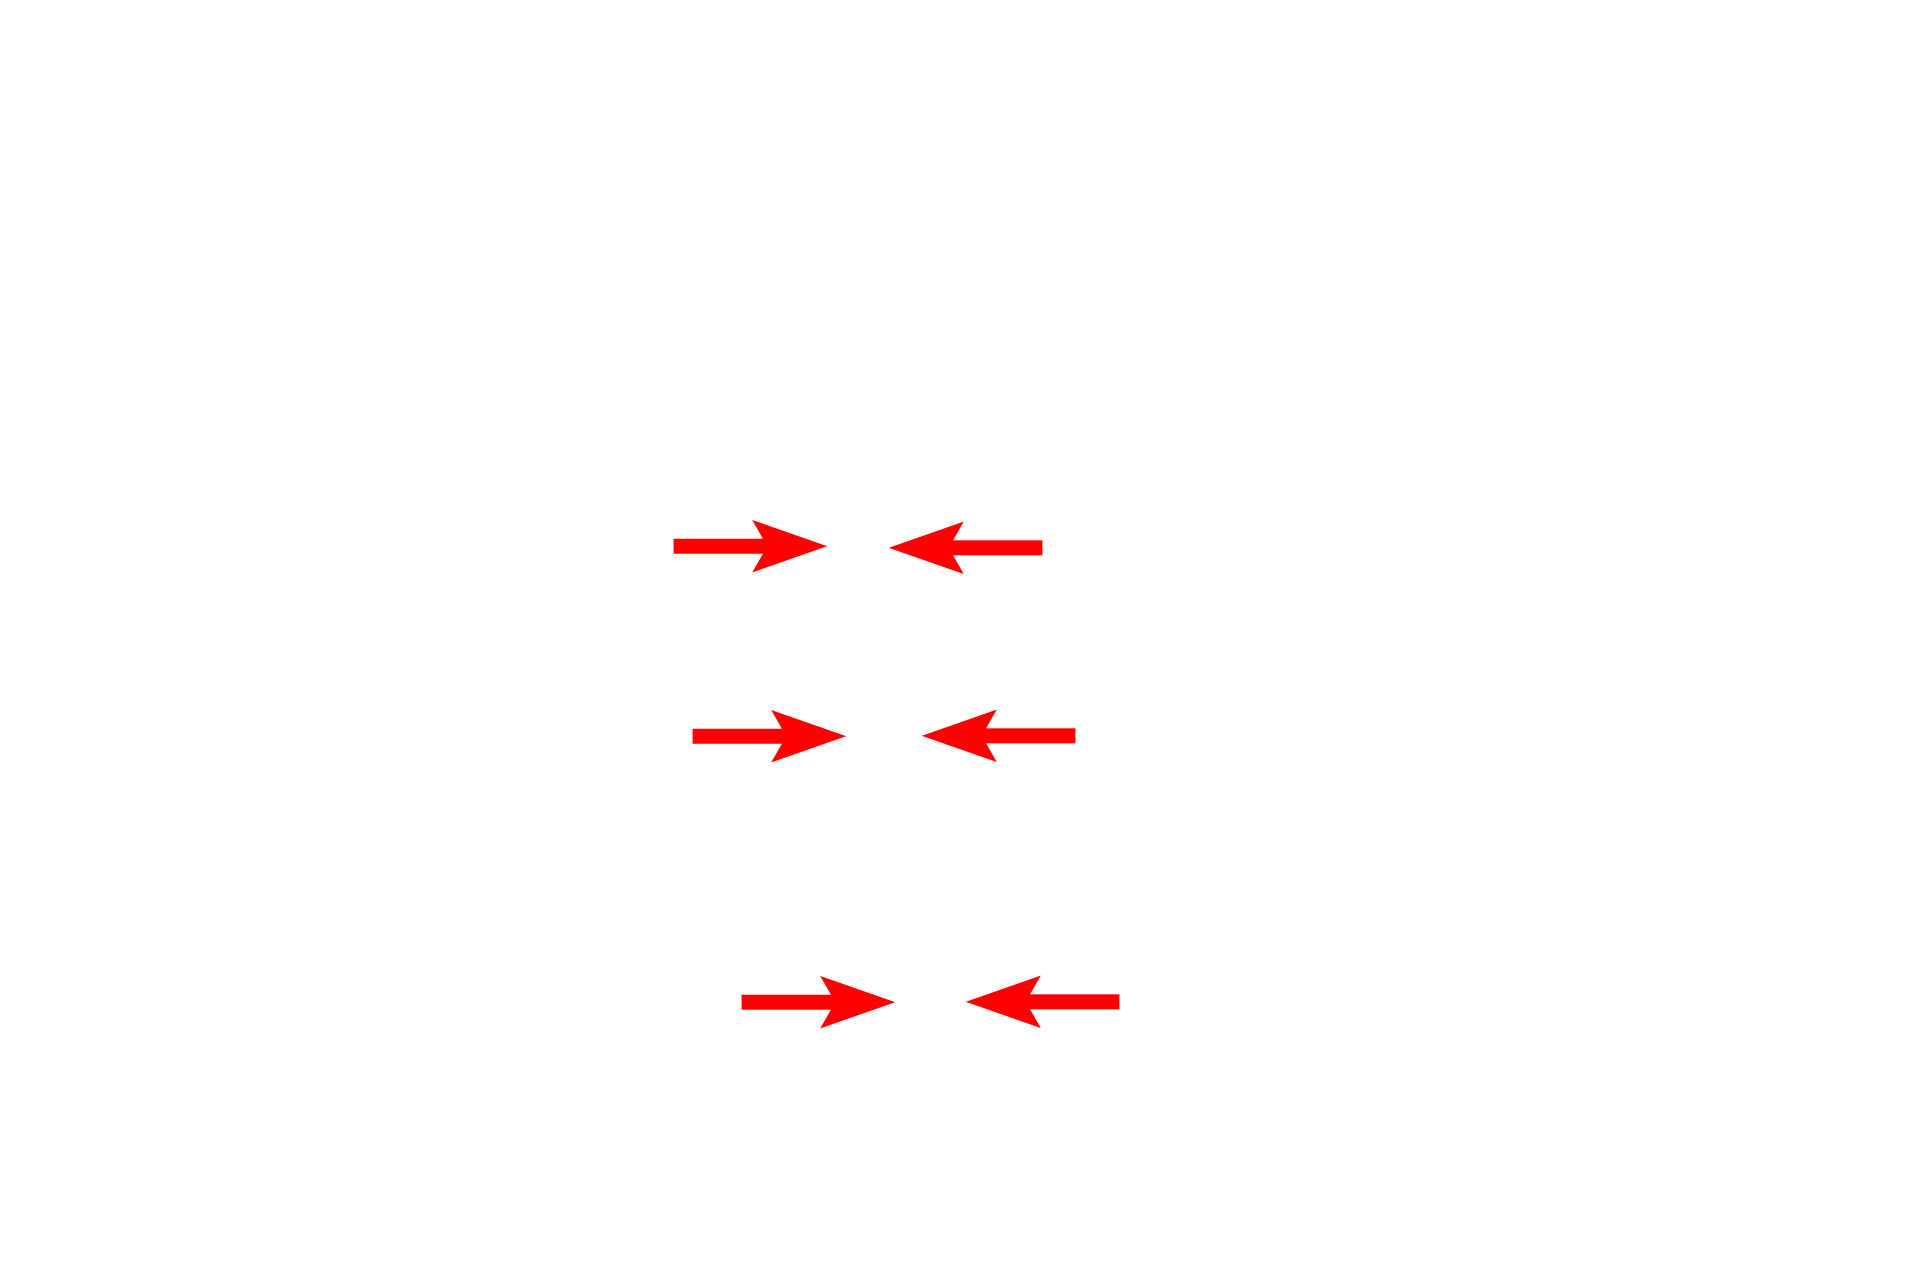  - H band <p>The sarcomere is the contractile unit of striated muscle and extends from one Z line to an adjacent Z line. During contraction, the width of the sarcomere narrows. The width of the A band remains constant, but both the I and H bands narrow as the areas of overlap of thin and thick myofilaments increase.</p>
